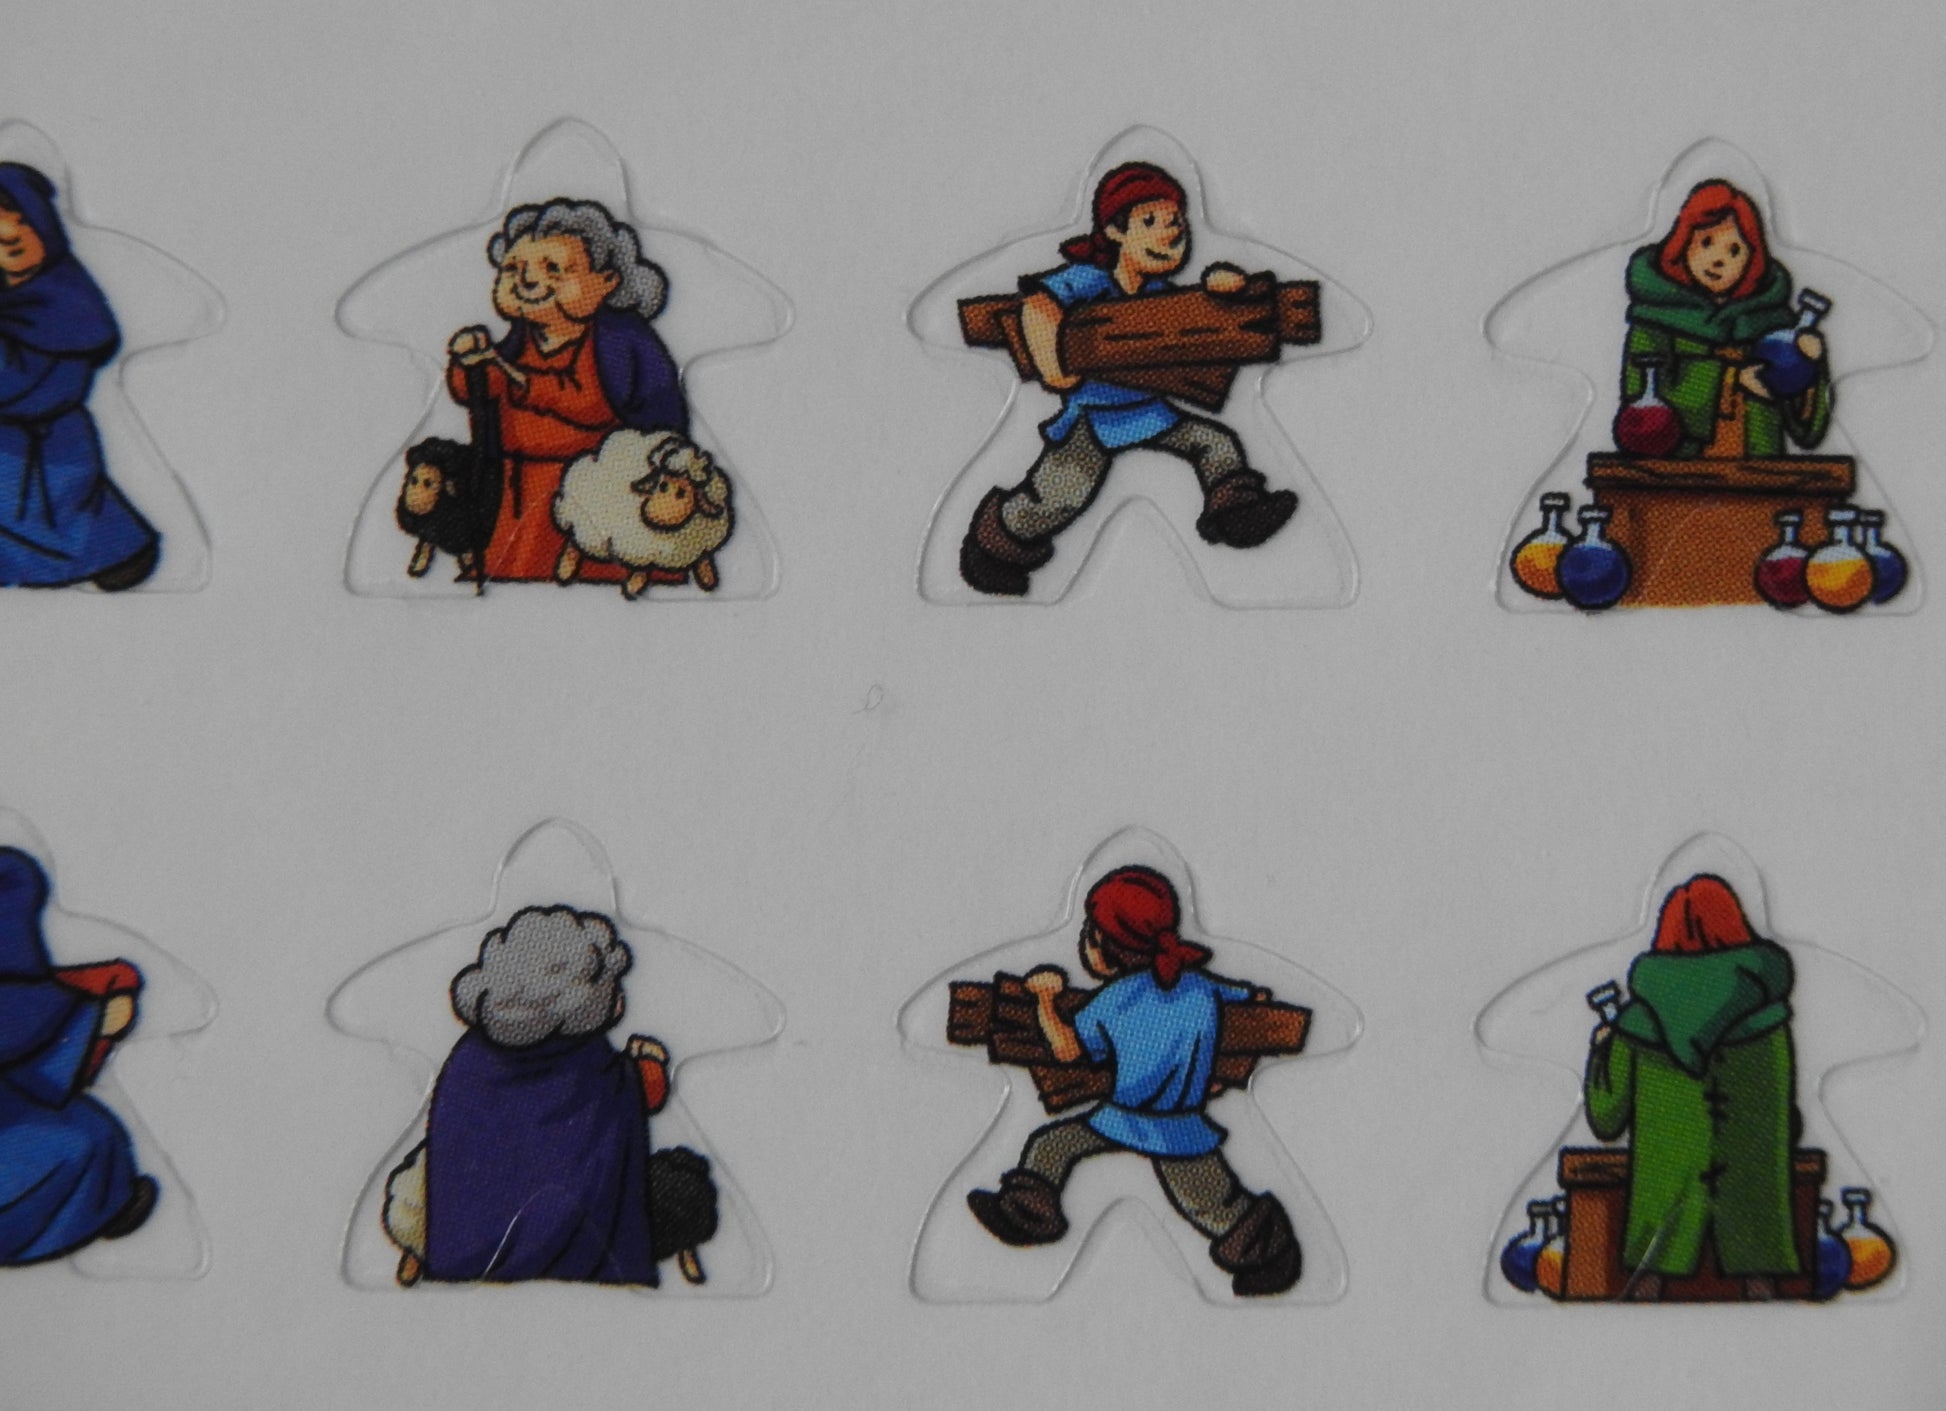 Close-up view of some of the meeple stickers, including a man gathering wood and a lady with various potions around her.